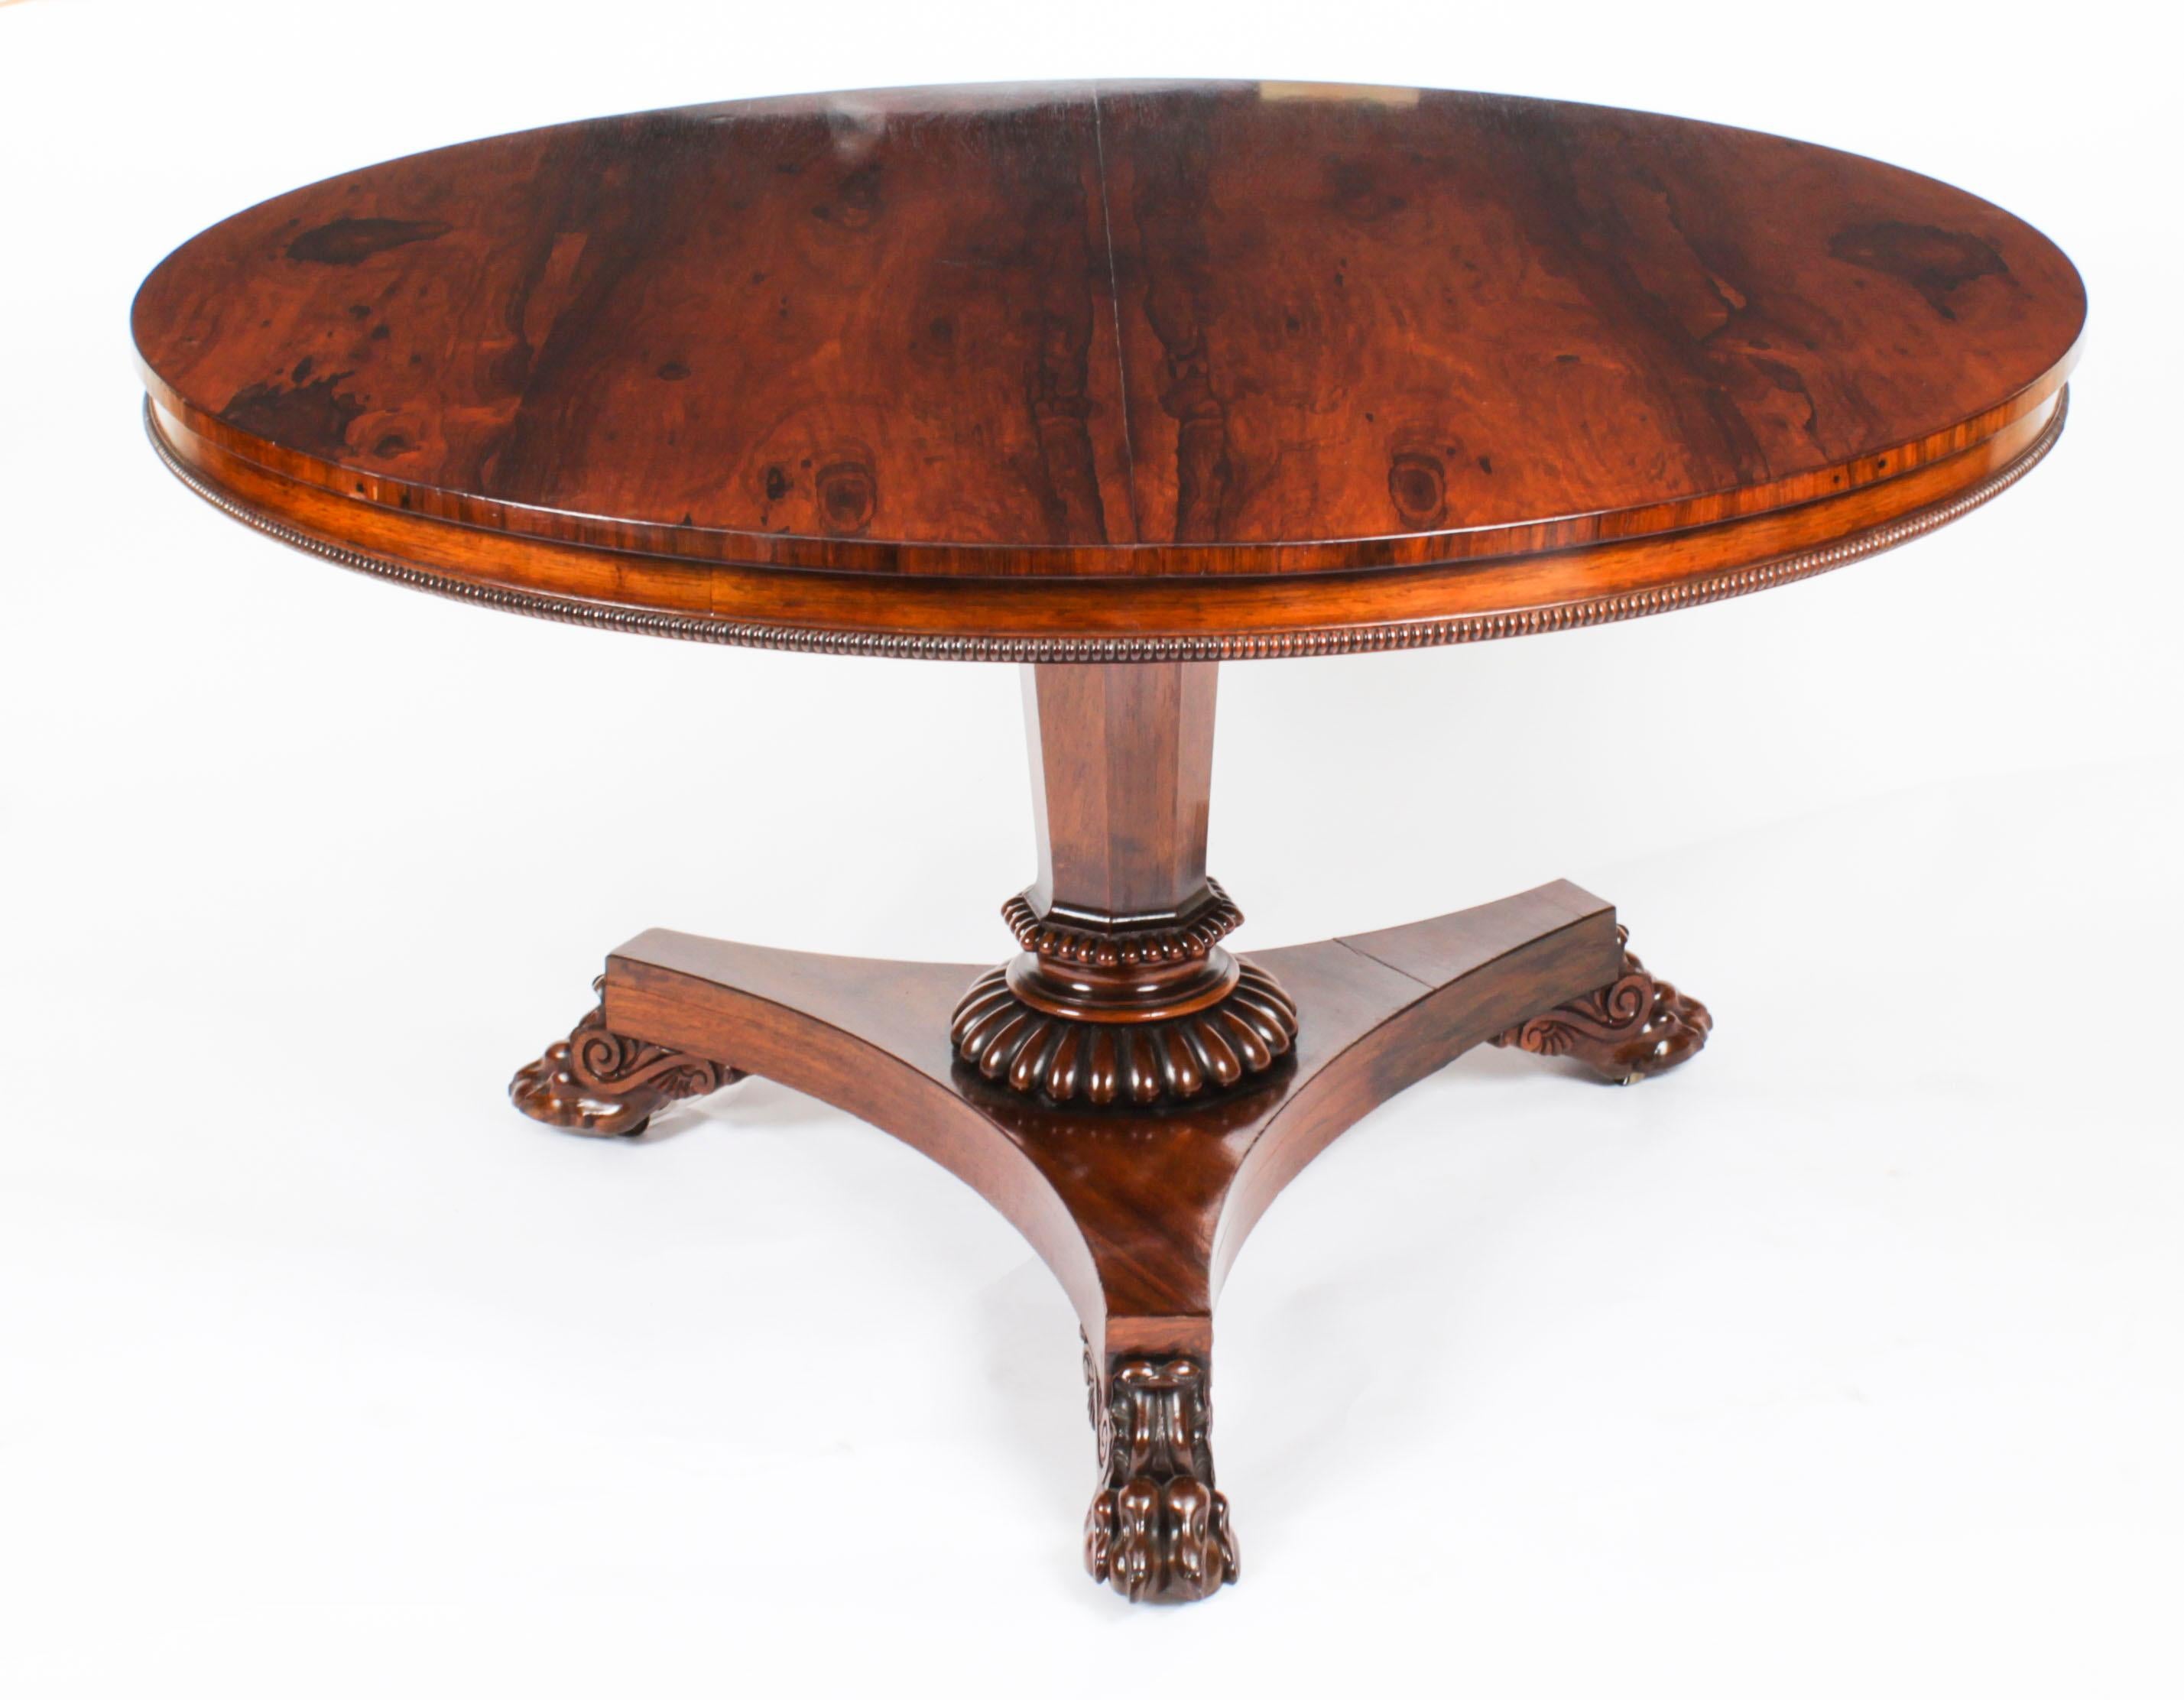 English Antique William IV Centre Breakfast Table by Gillows 19th Century